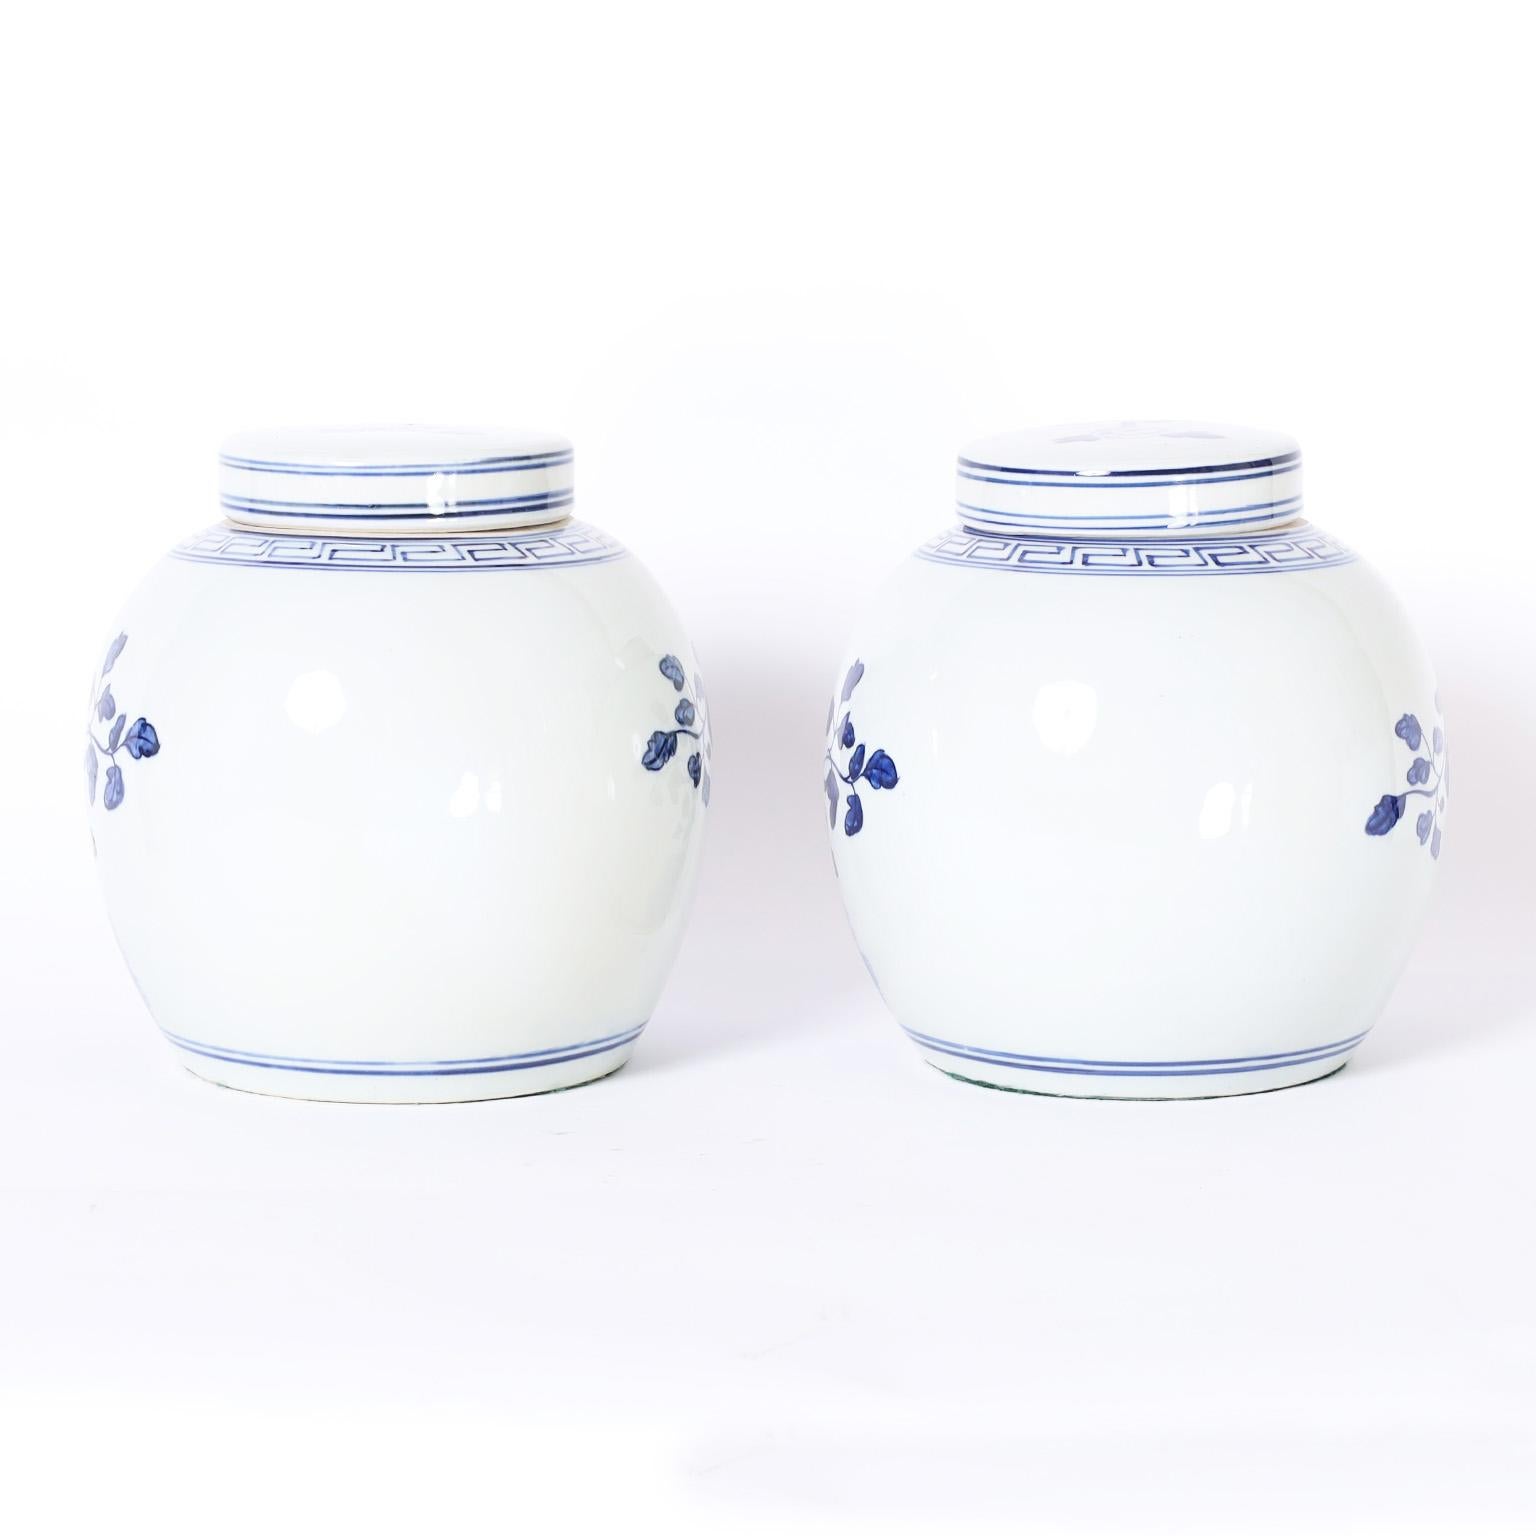 Chinese Export Pair of Blue and White Porcelain Lidded Jars with Flowers